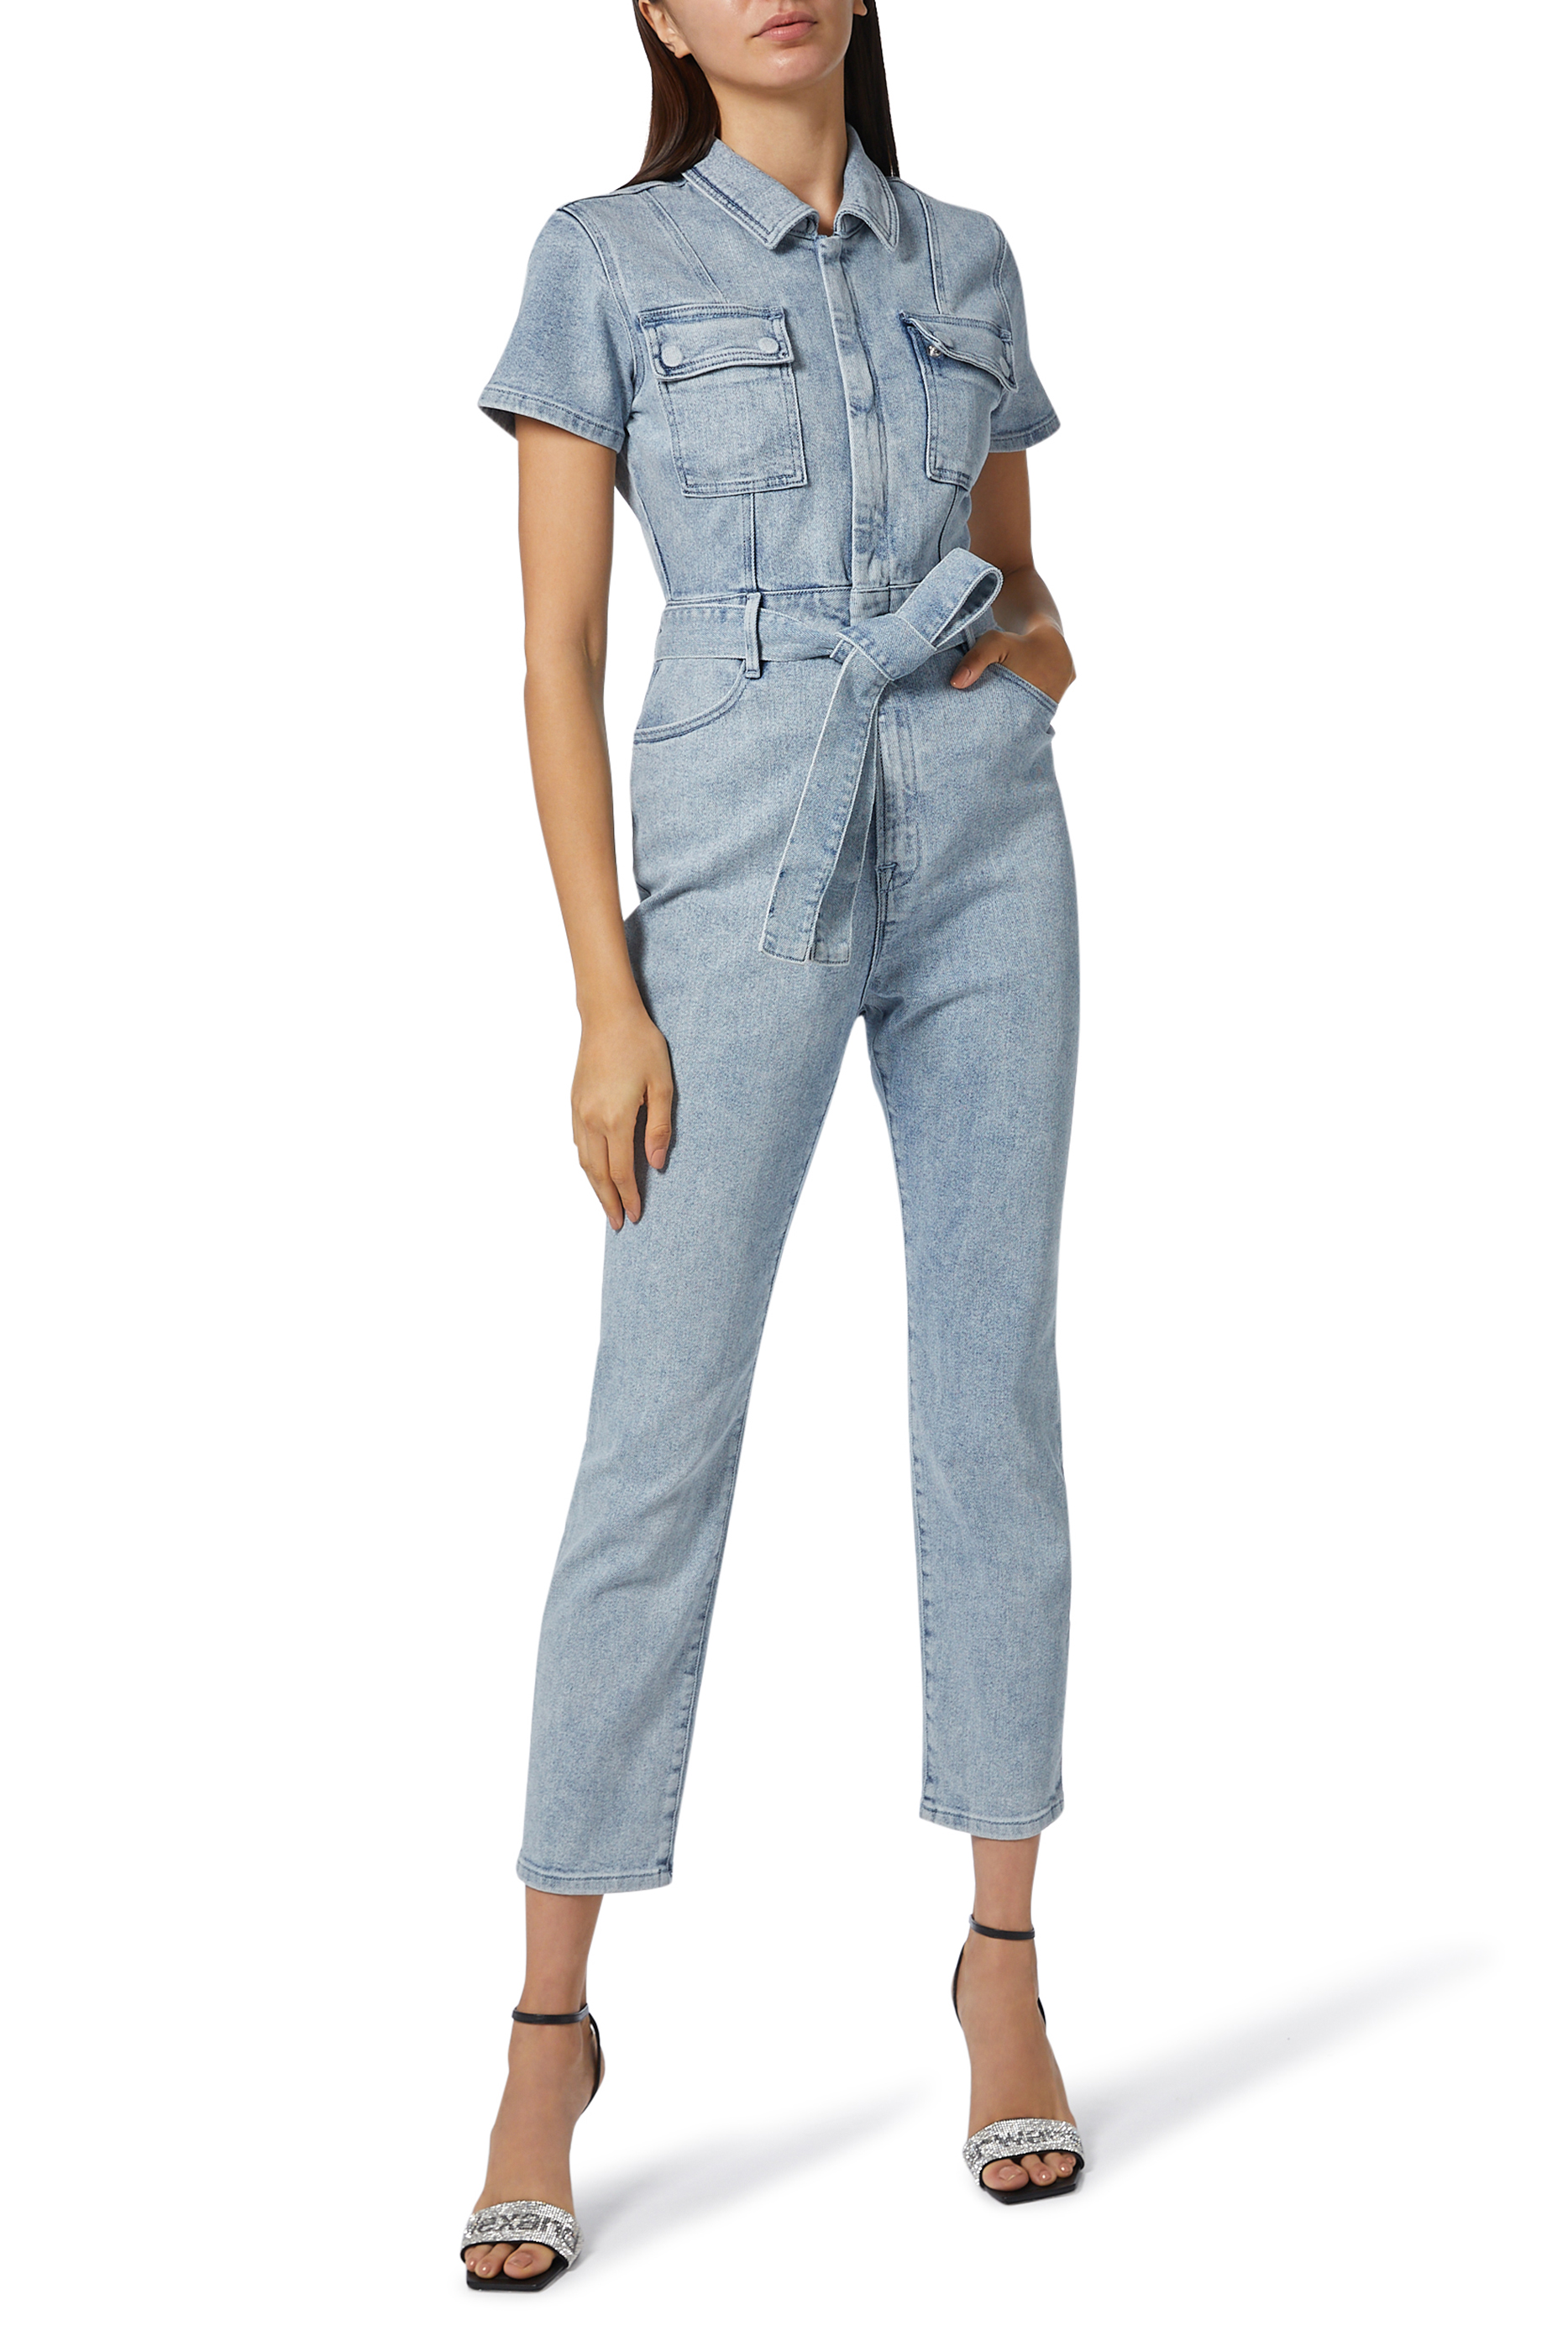 Buy Good American Fit for Success Jumpsuit - Womens for AED 825.00 ...